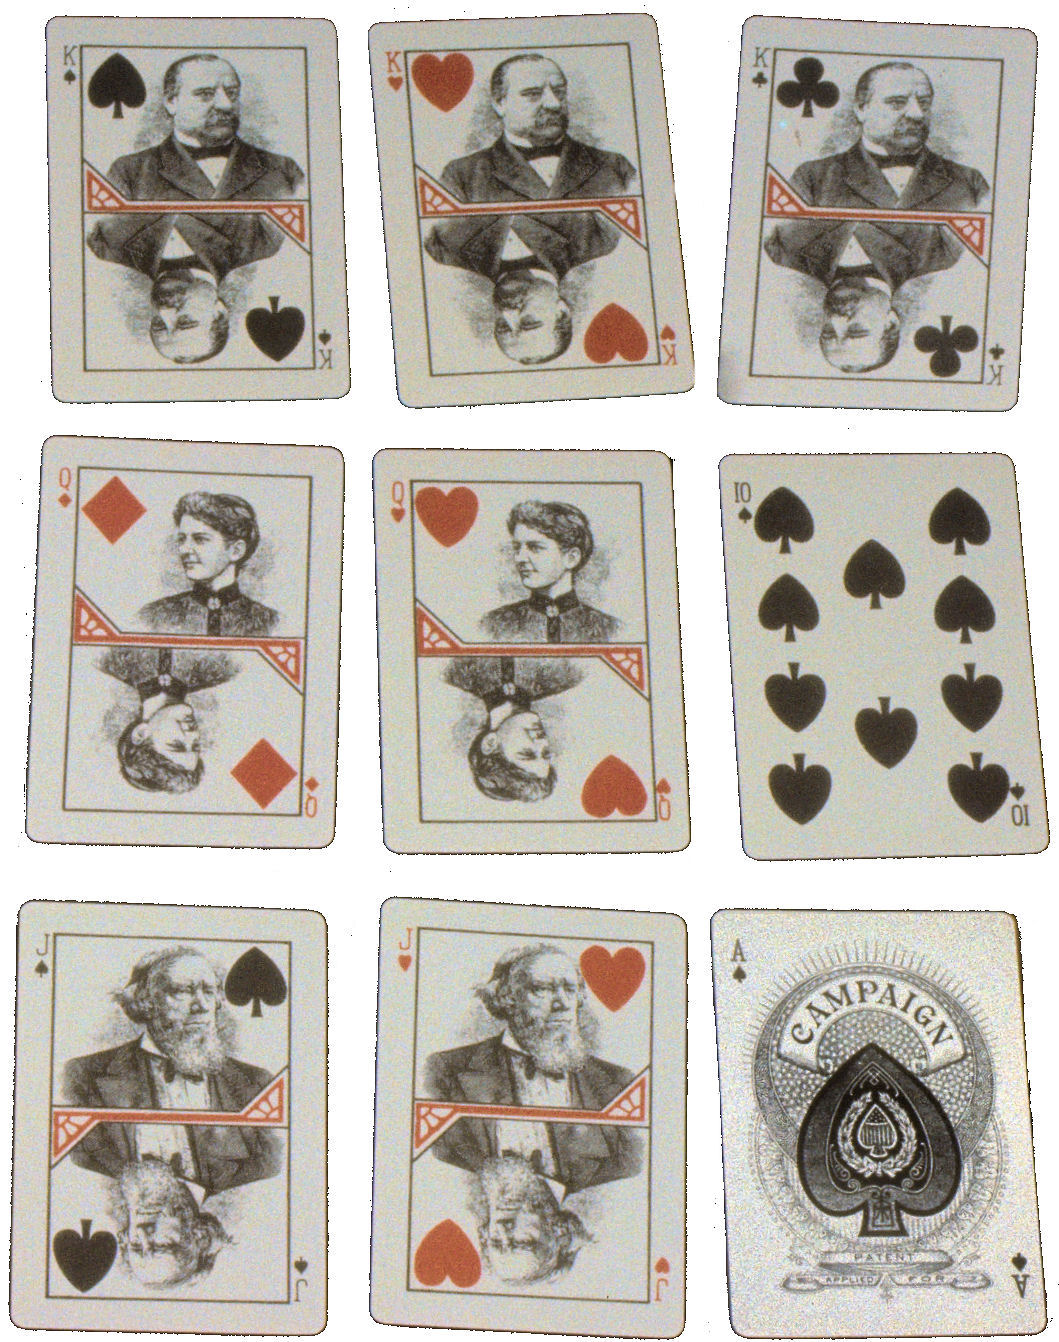 Grover Cleveland cards